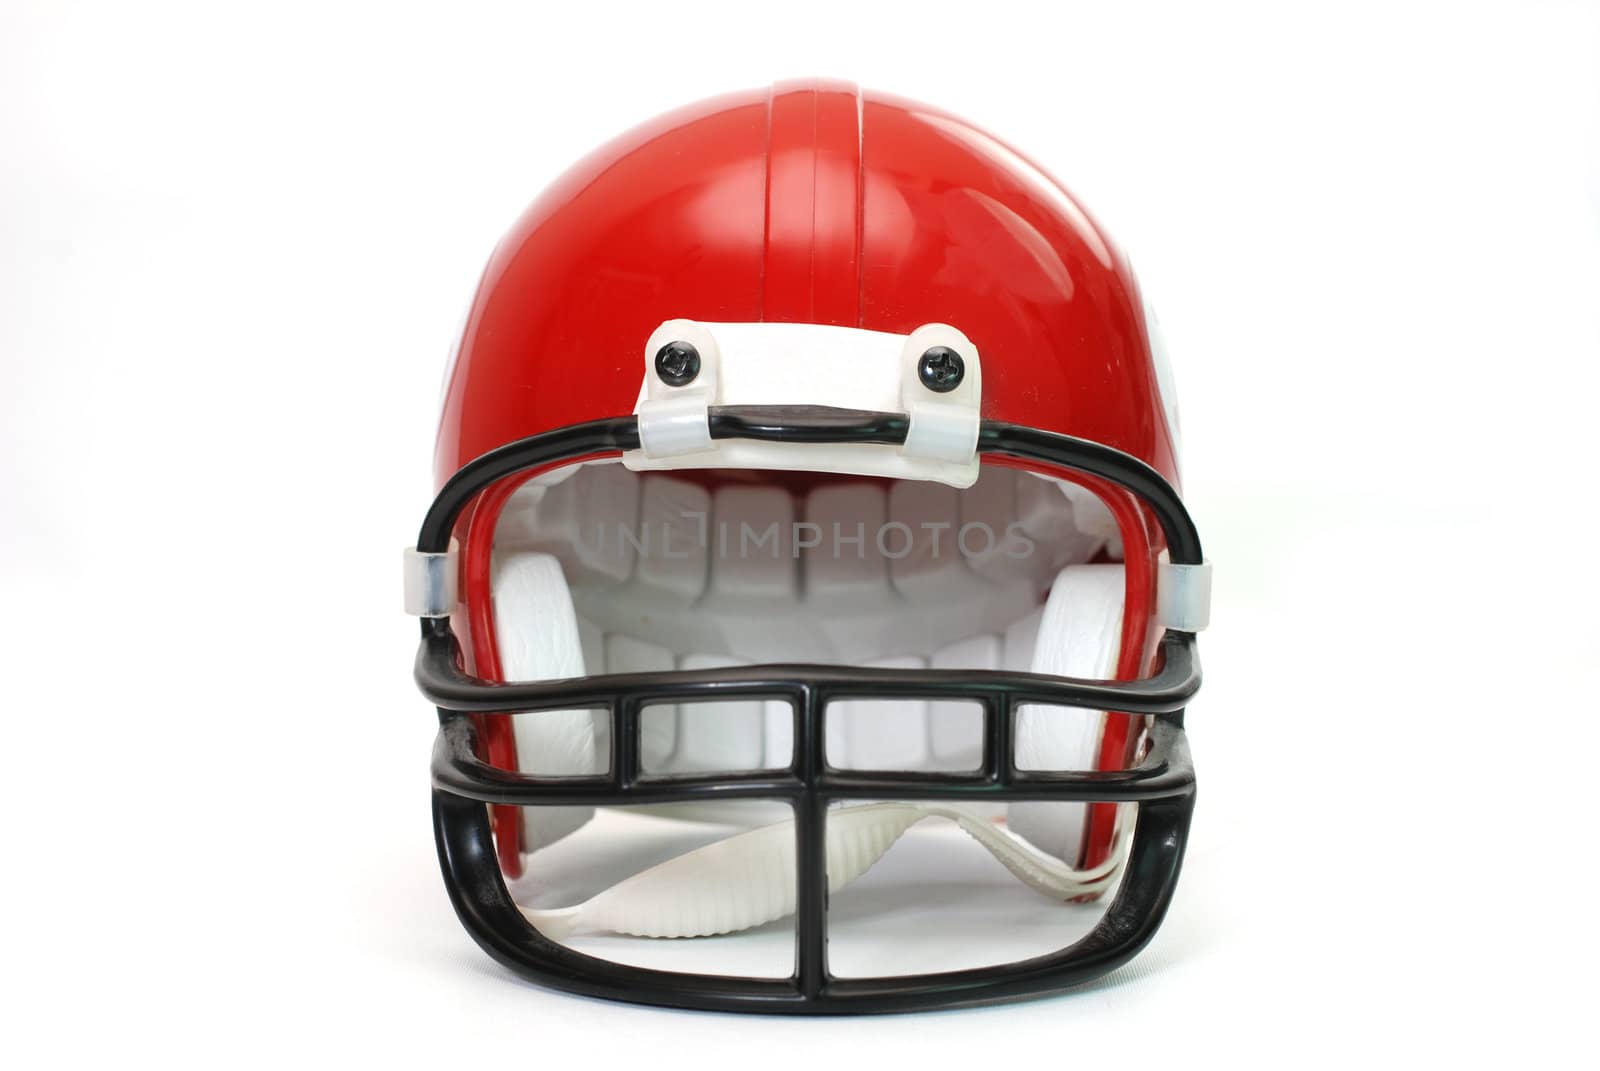 Red football helmet isolated on white background.